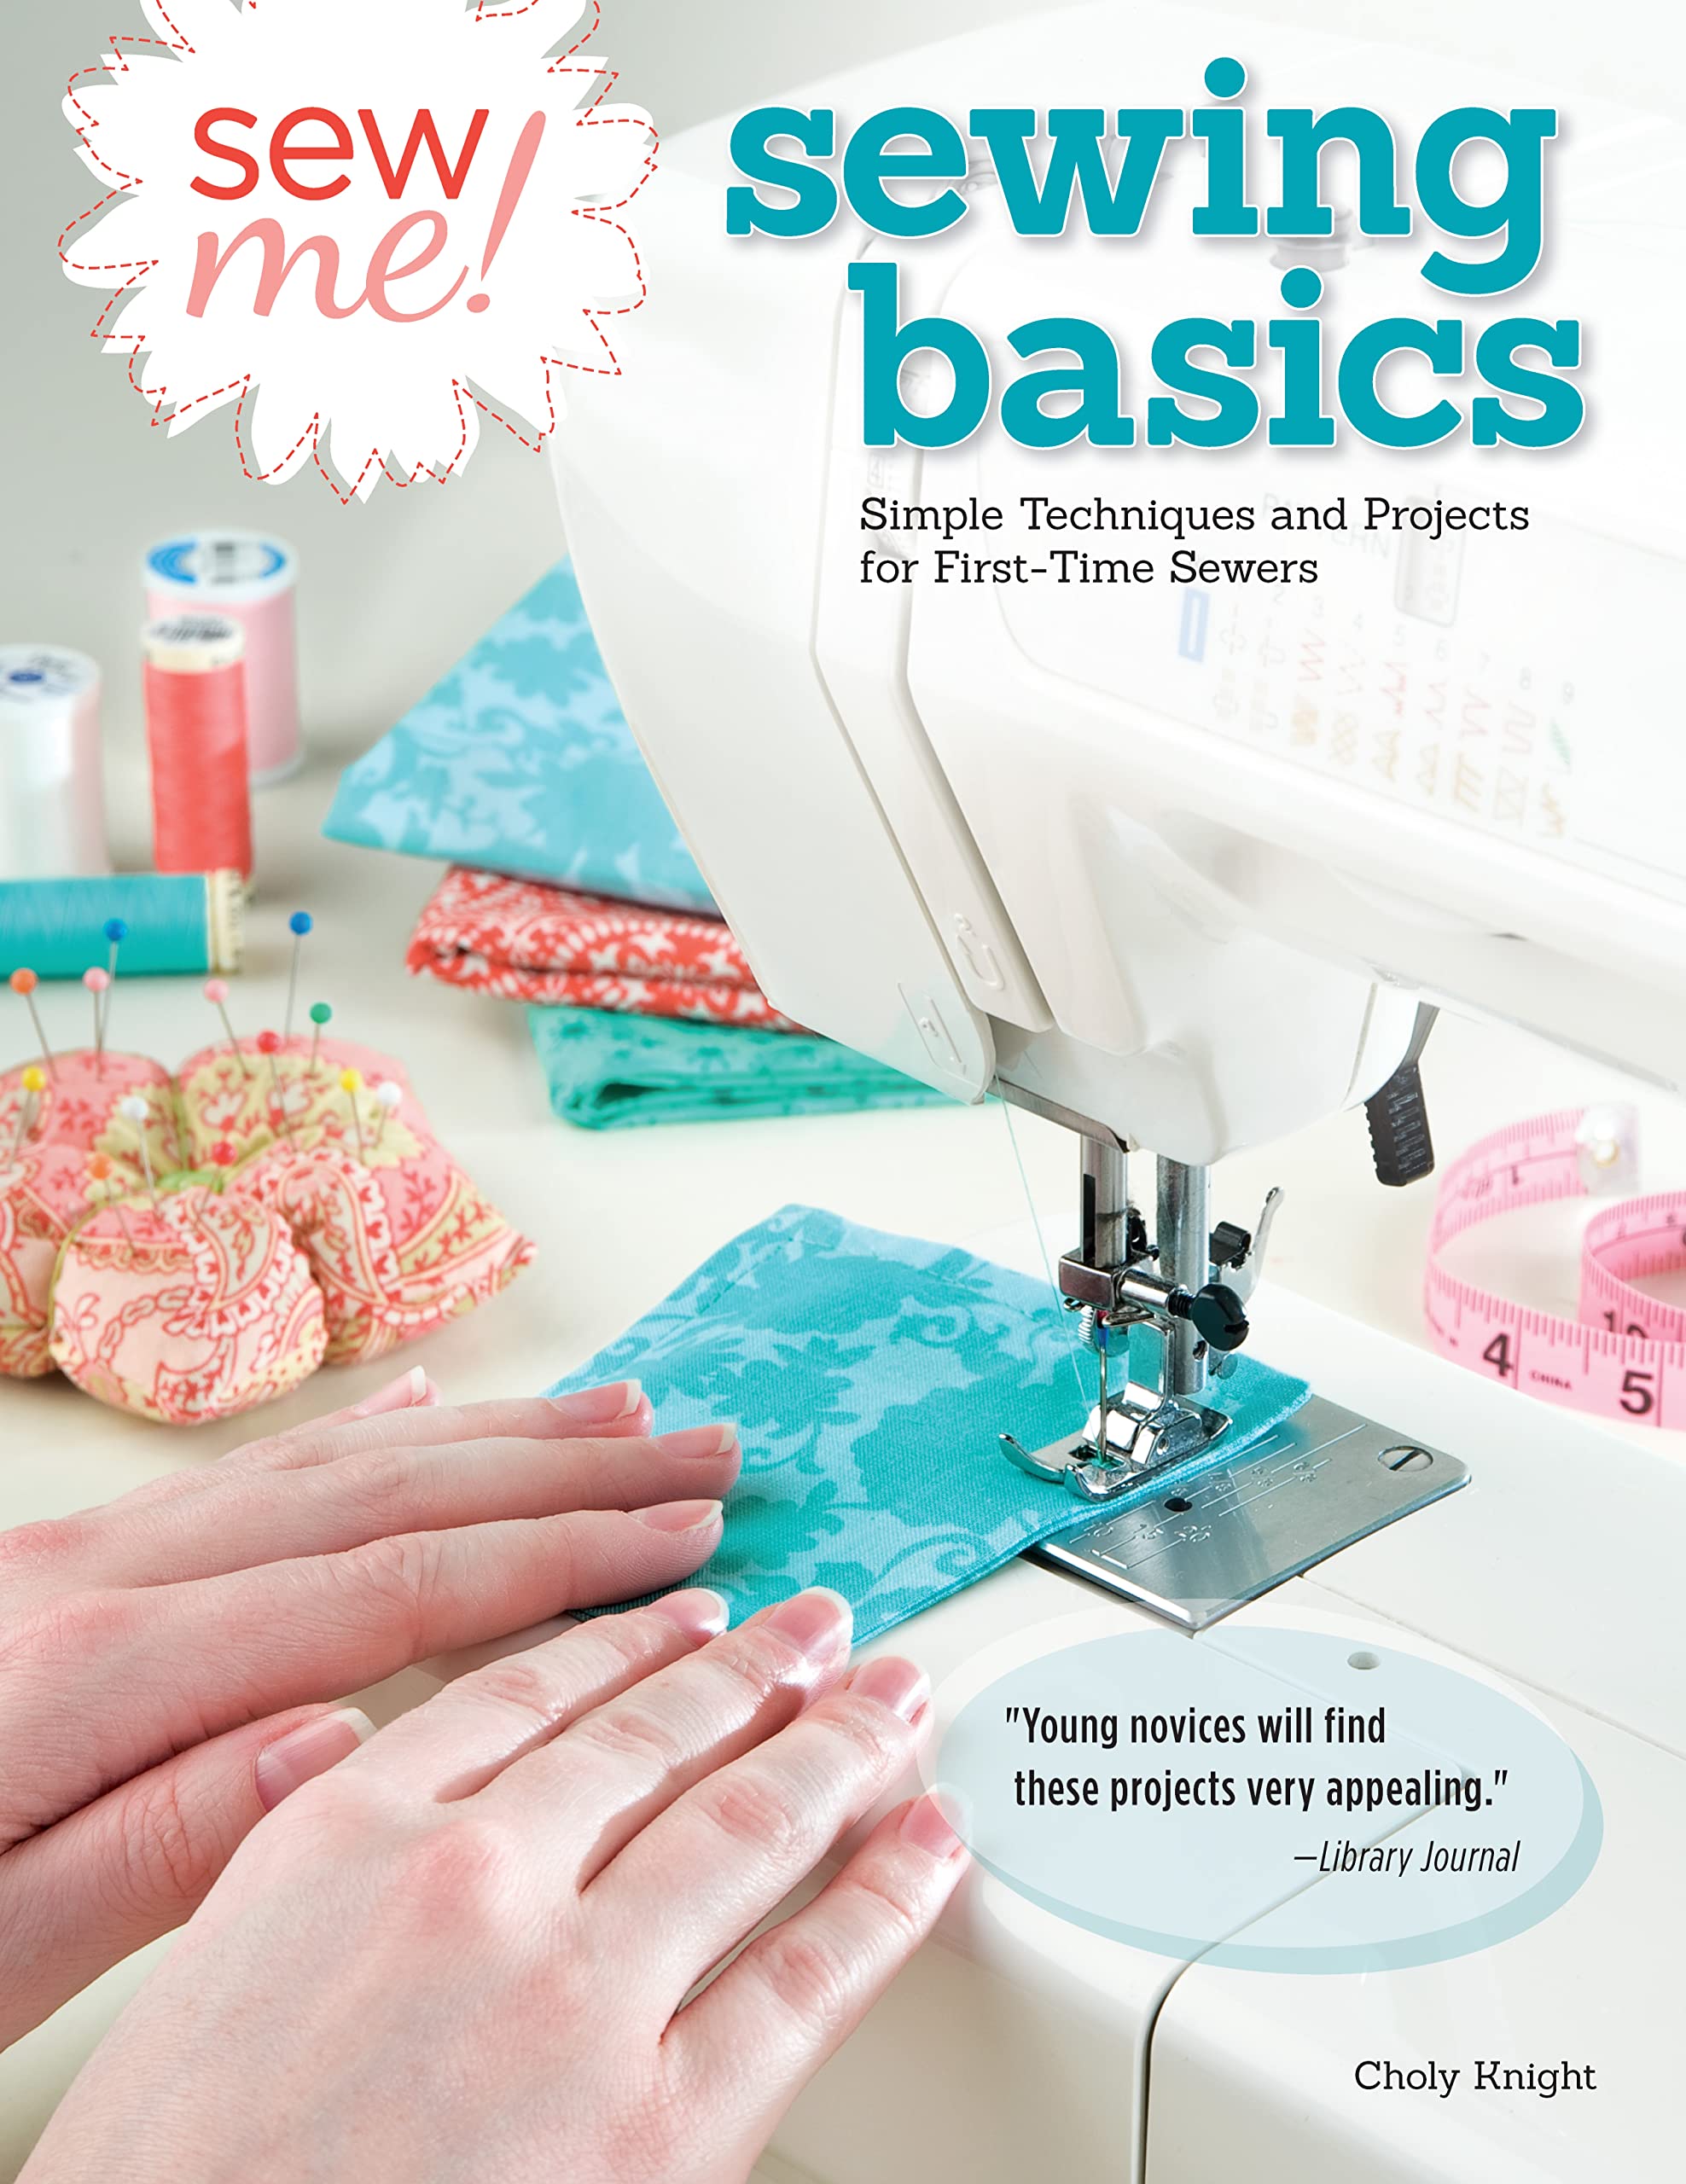 Book Cover Sew Me! Sewing Basics: Simple Techniques and Projects for First-Time Sewers (Design Originals) Beginner-Friendly Easy-to-Follow Directions to Learn as You Sew, from Sewing Seams to Installing Zippers